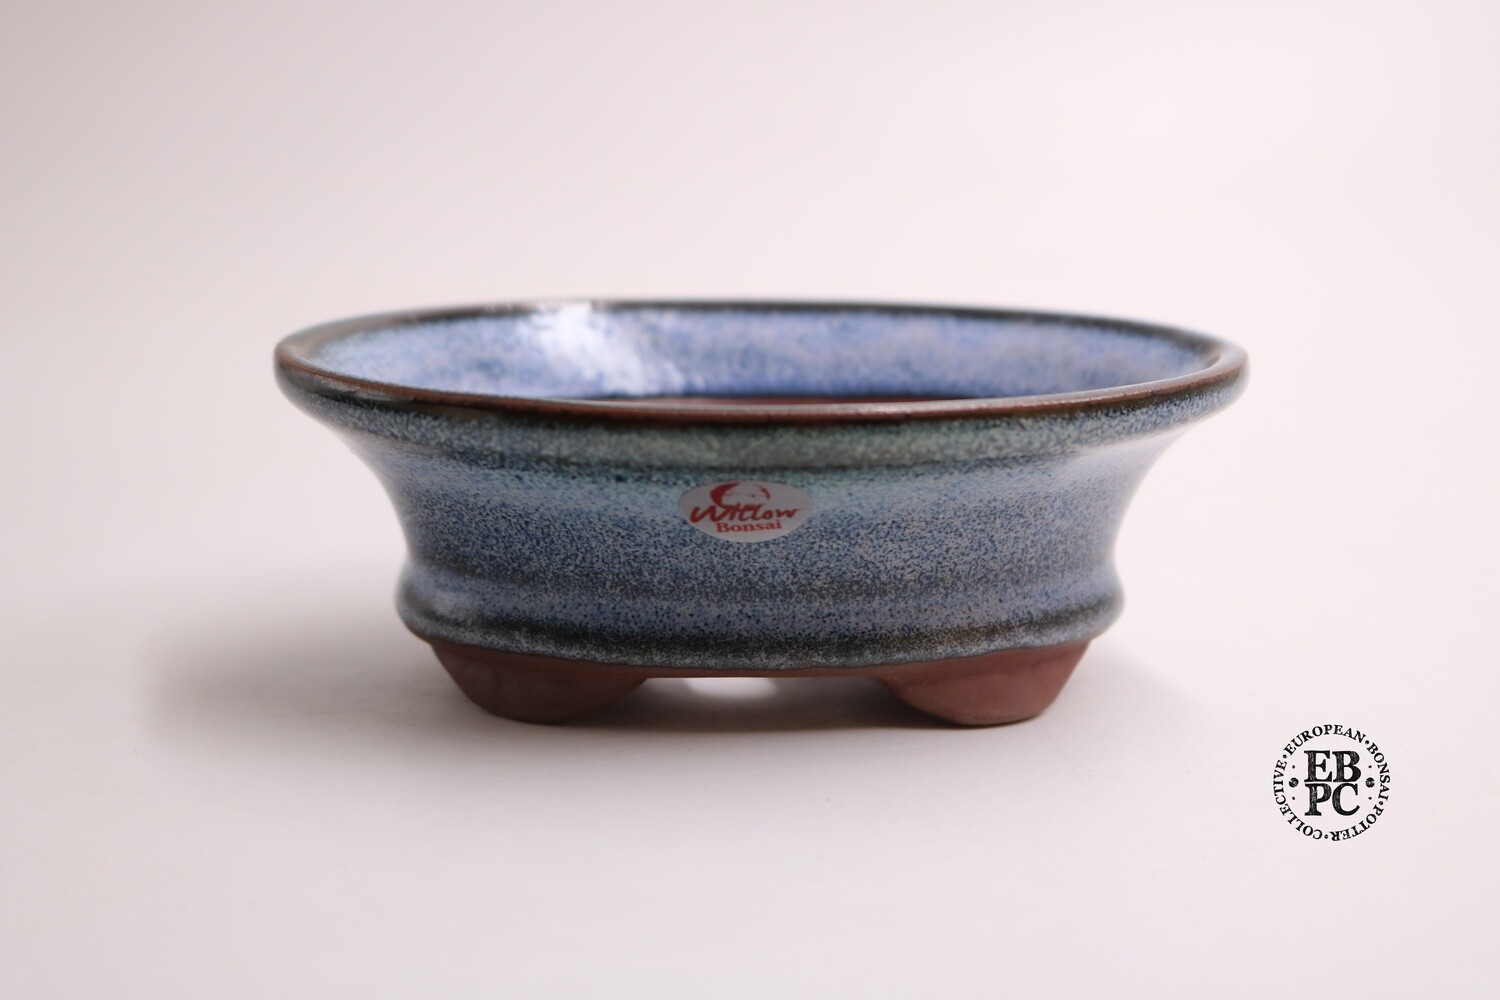 Willow Bonsai Pots. 11cm; Flared Oval; Denim Glaze; Mame / Small Shohin Size; Made in South Africa.